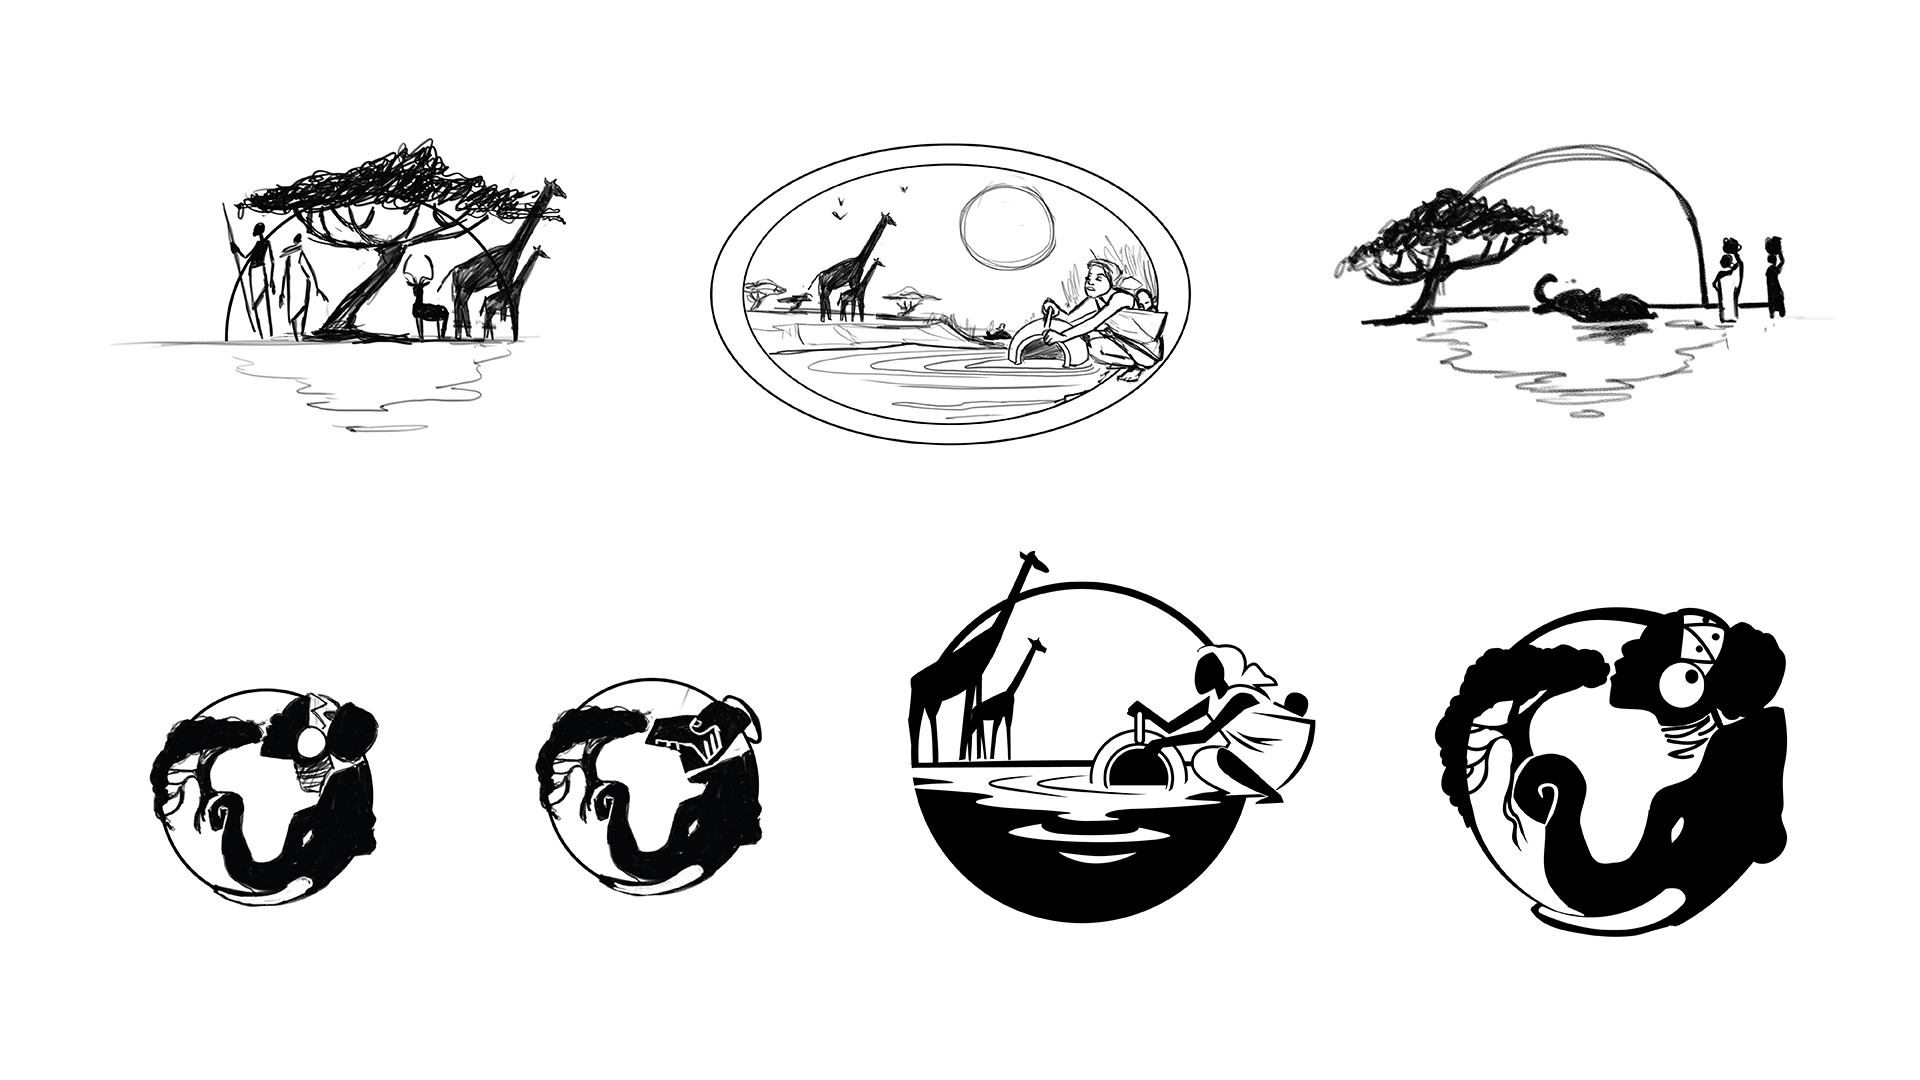 African Community & Conservation Foundation Logo Concepts